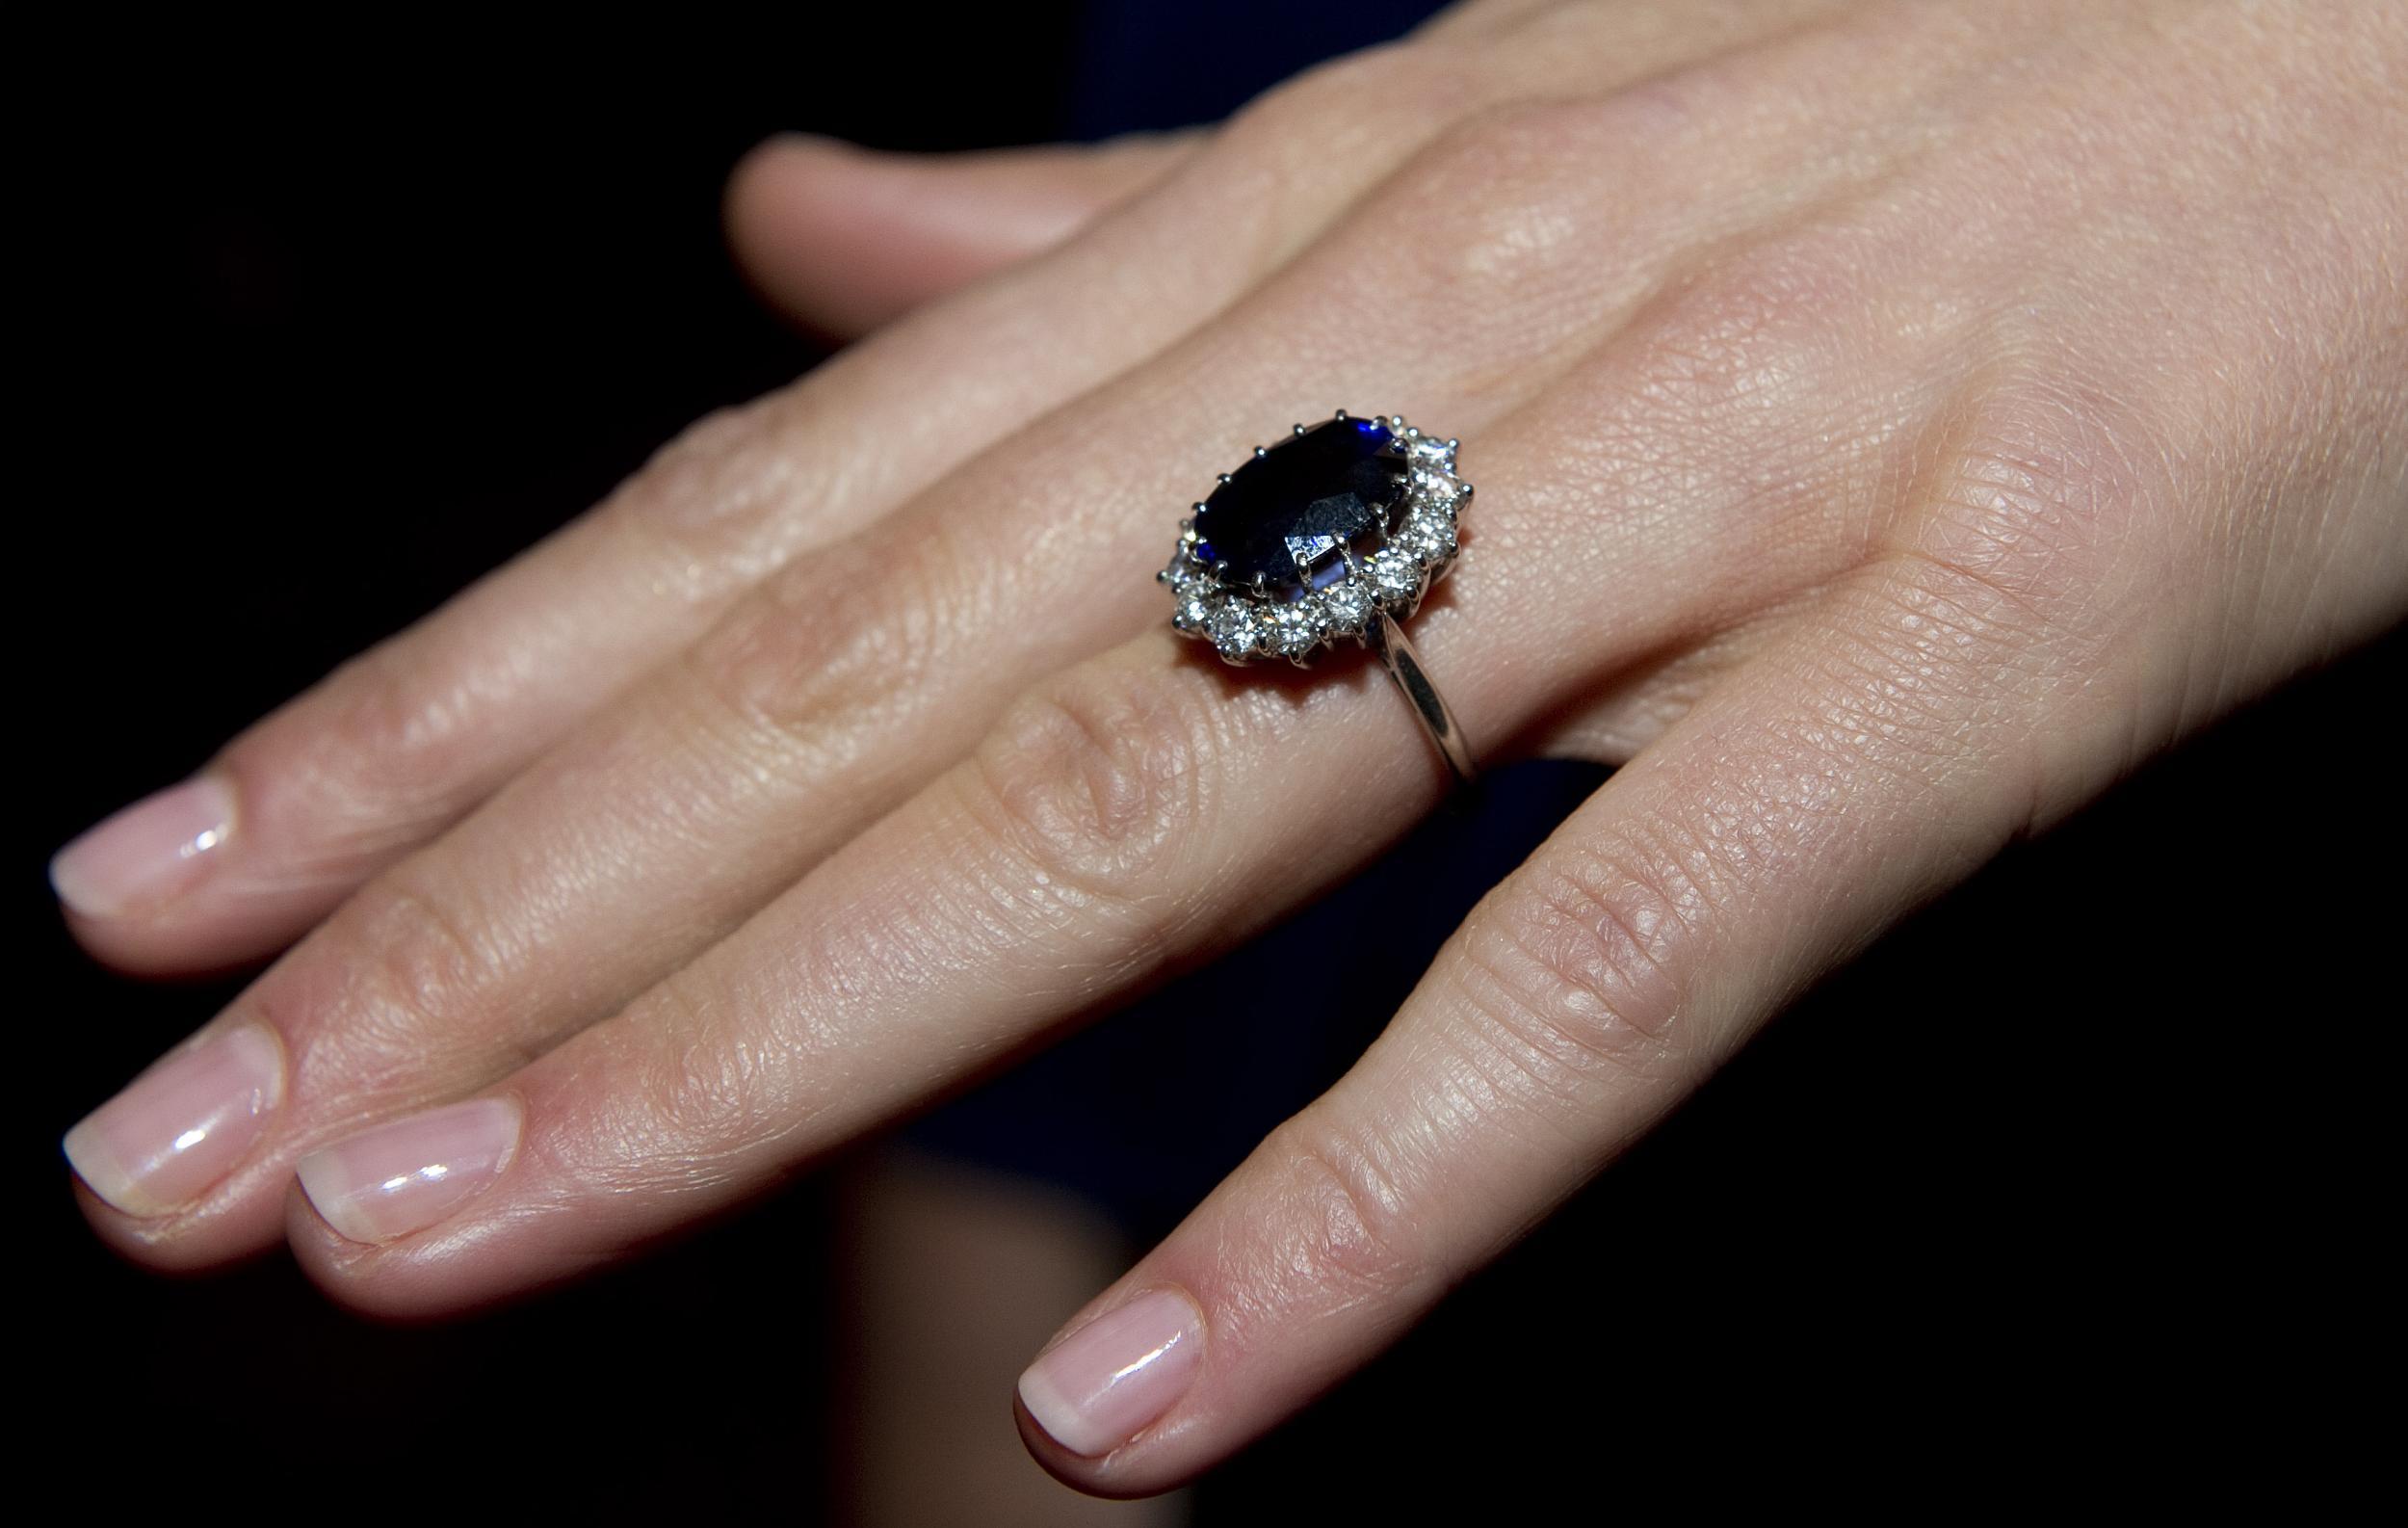 The Duchess of Cambridge's halo engagement ring has a sapphire and diamonds (Getty)